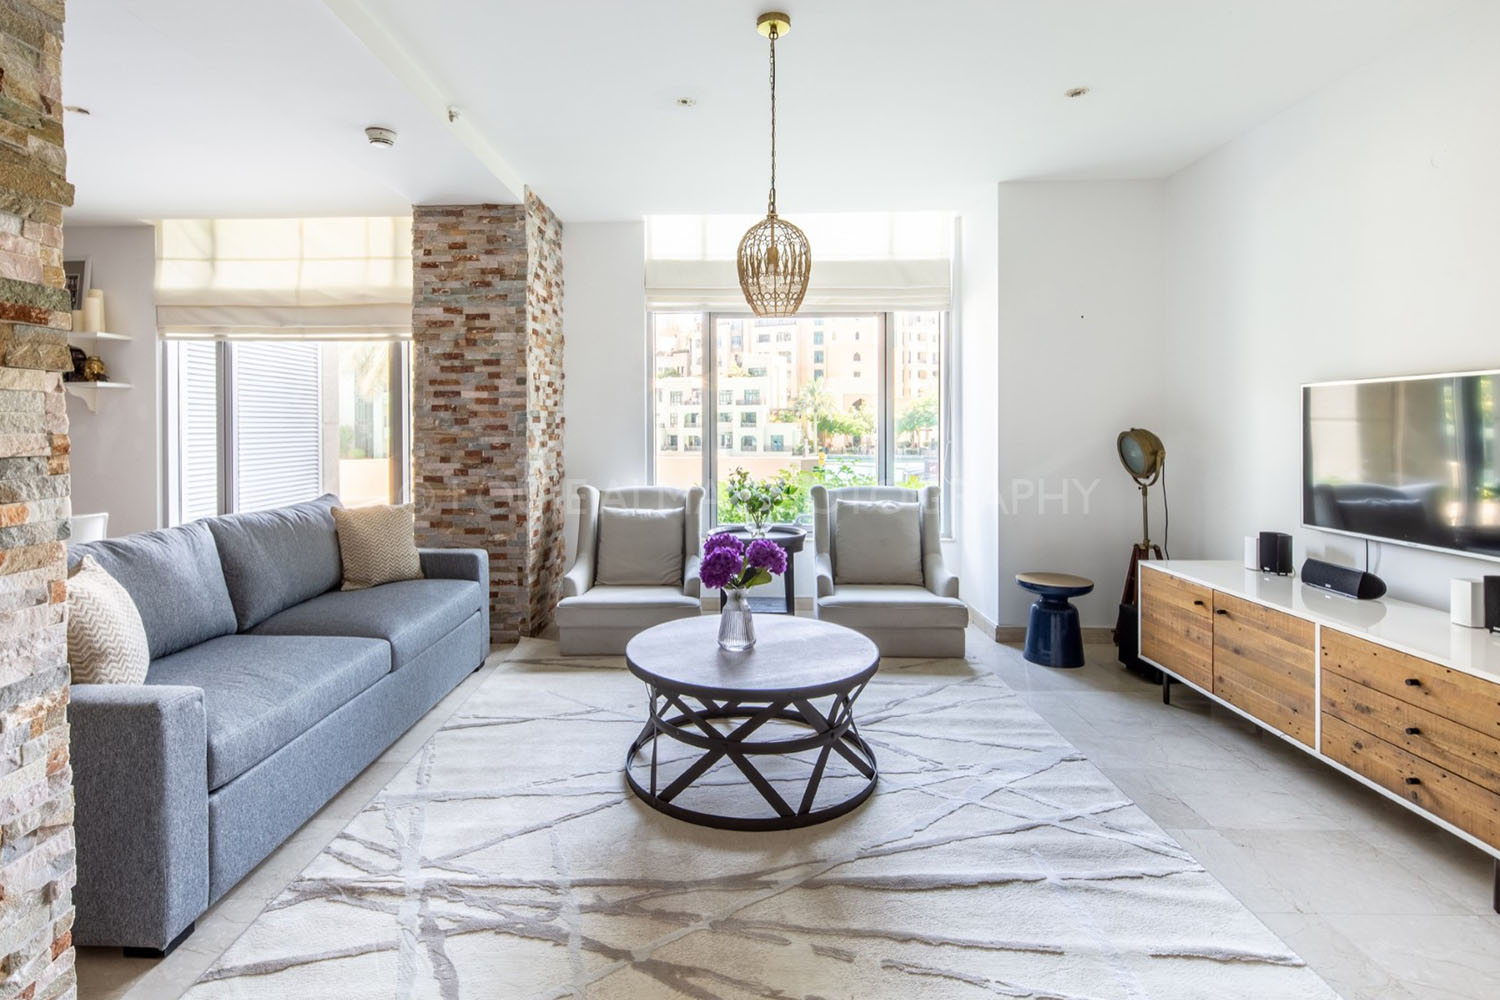 Real Estate Photography - Classy Apartment in Downtown, Dubai